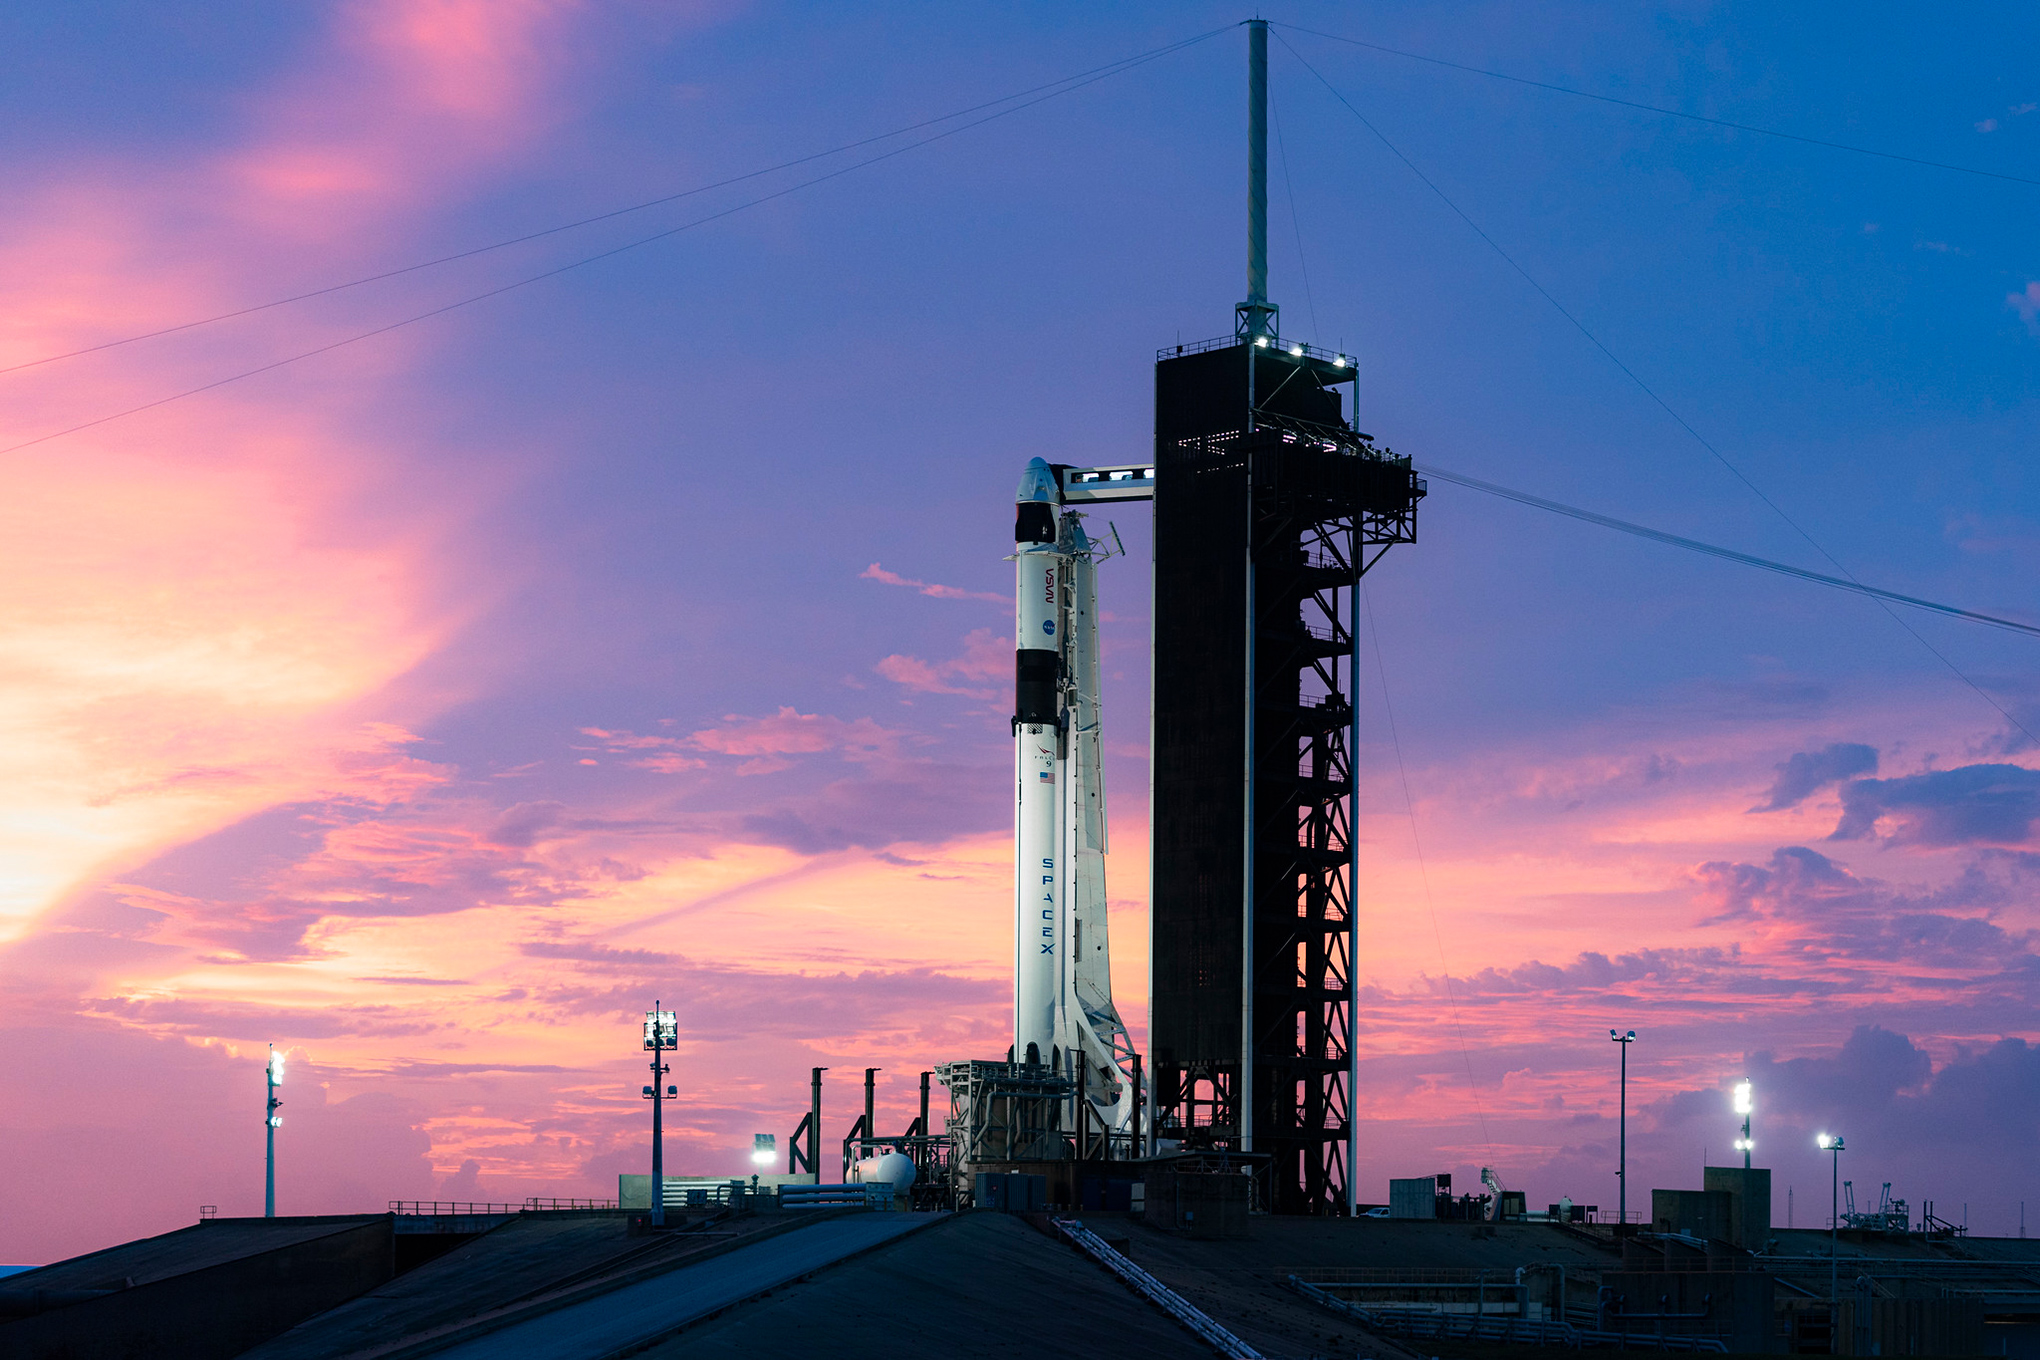 The <em>Crew Dragon</em> spacecraft and the Falcon 9 rocket a few days before the launch of Crew-1 Mission in Nov. 2020. (Courtesy SpaceX)